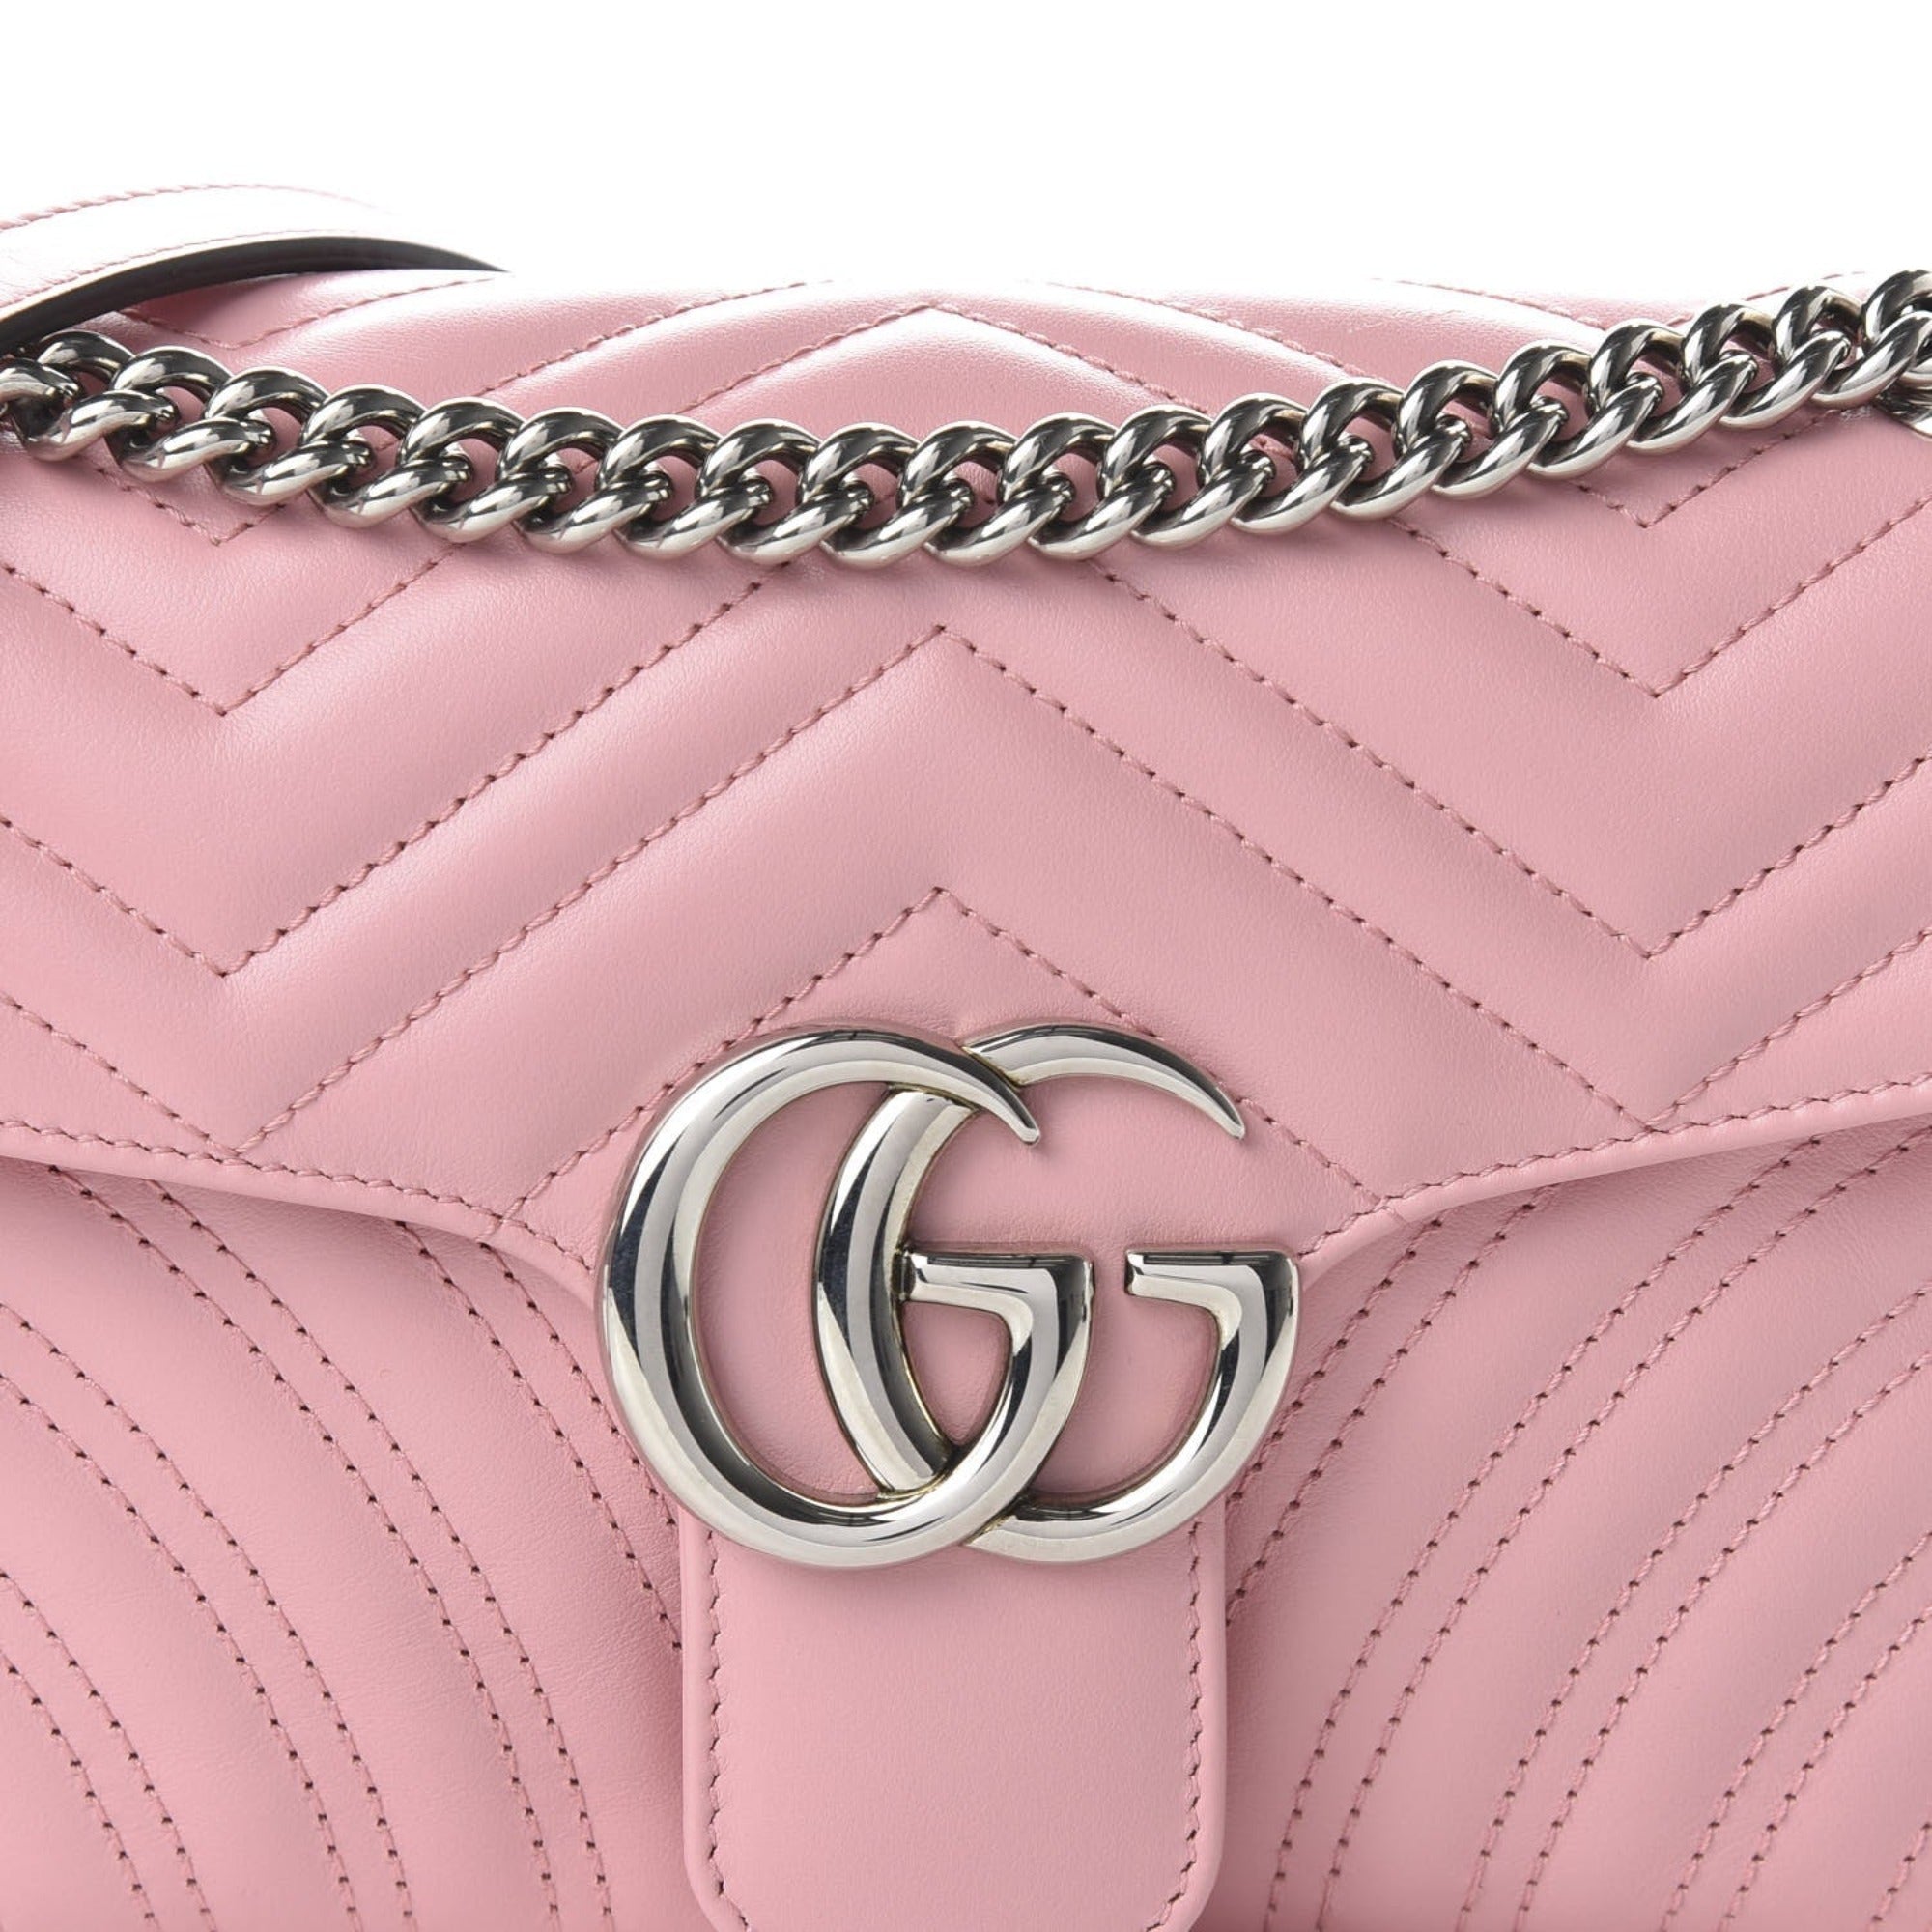 Gucci Marmont Wild Rose Leather Matelasse Mini Shoulder Bag 446744 at_Queen_Bee_of_Beverly_Hills